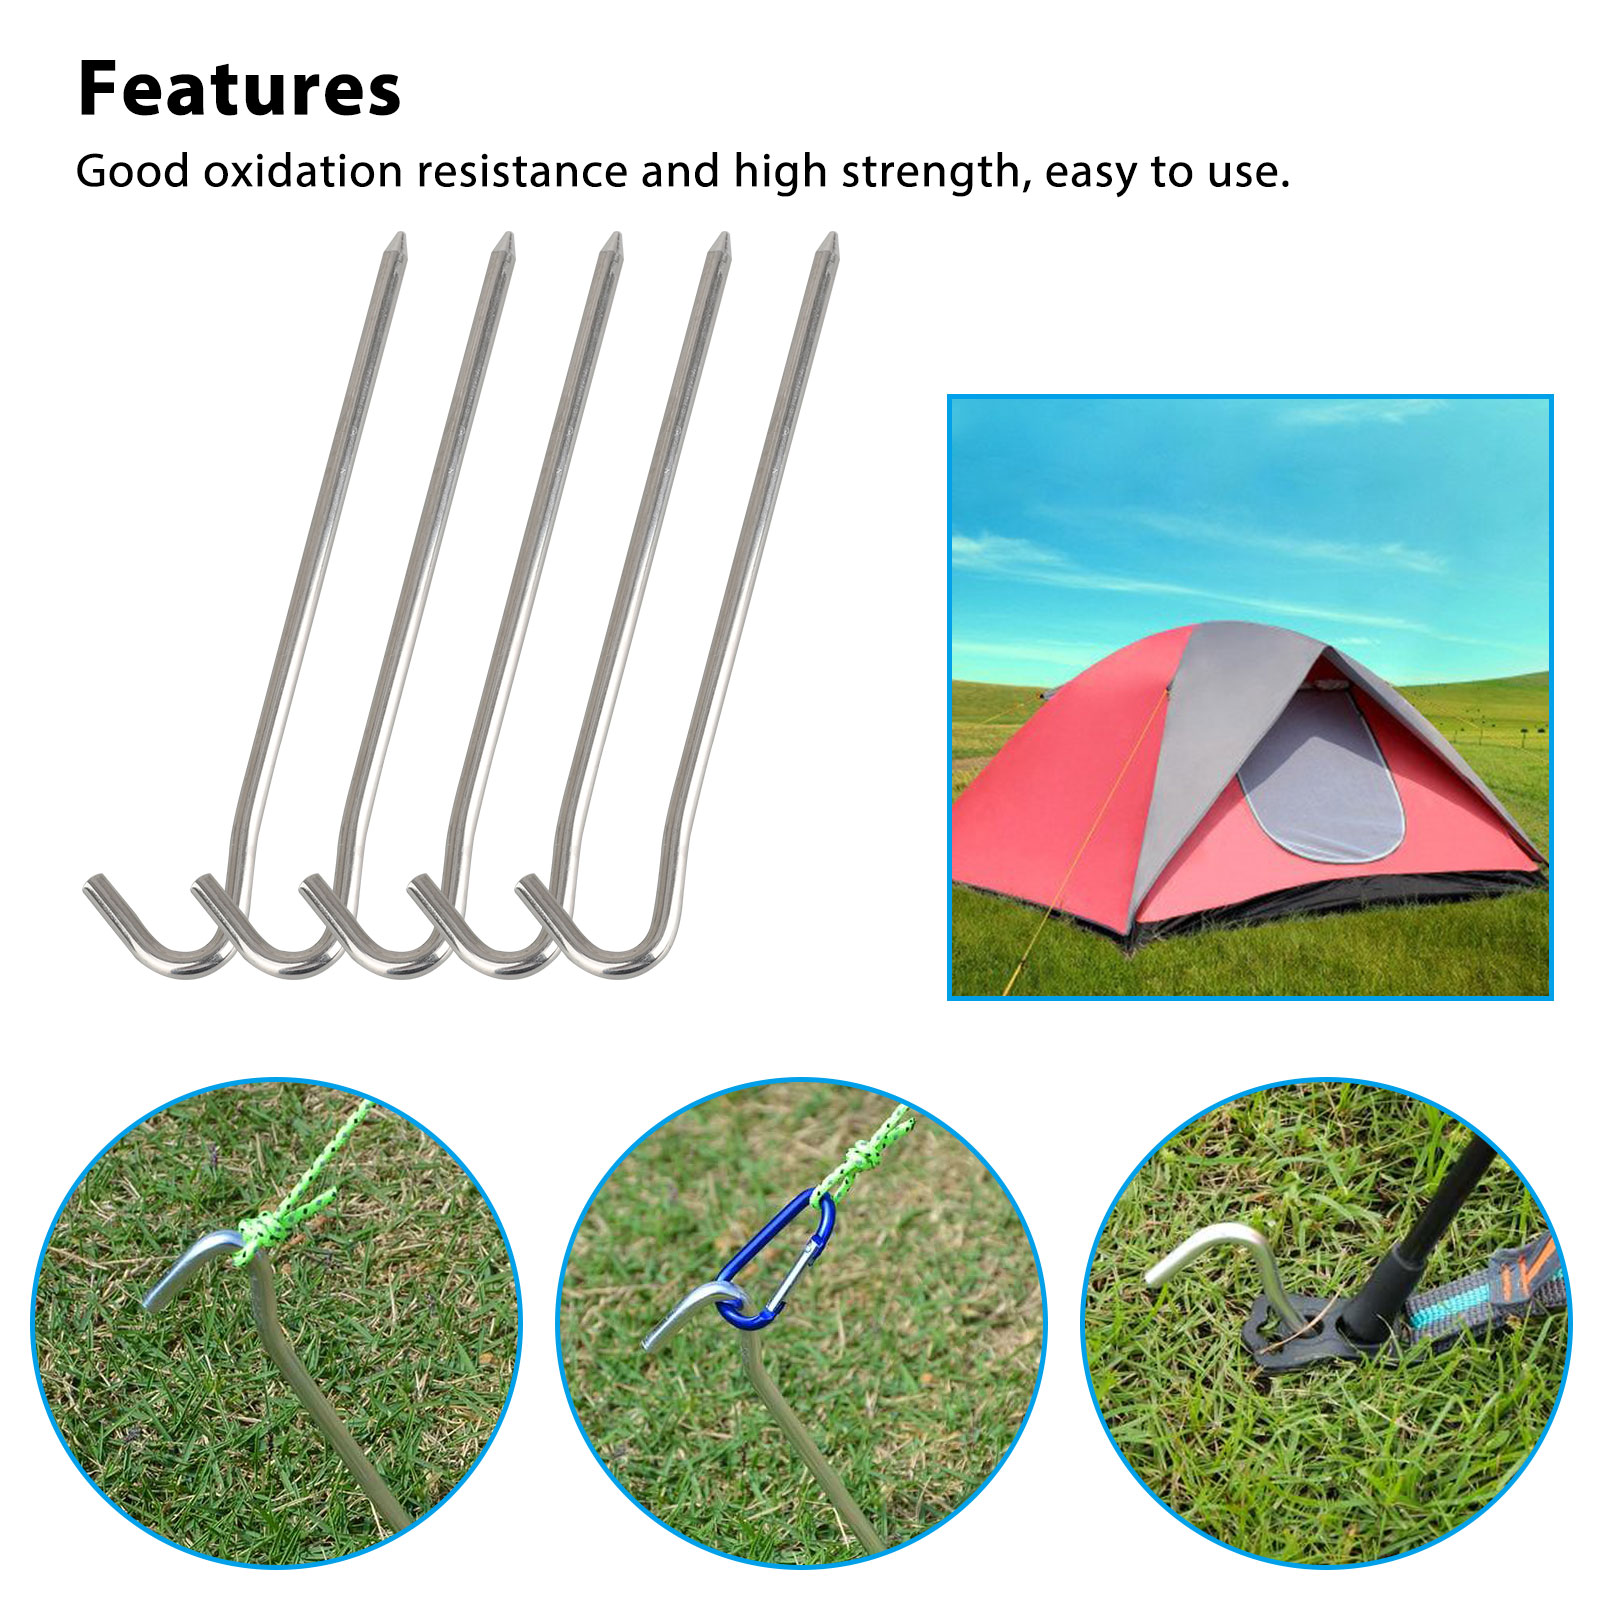 EEEkit Steel Tent Pegs, Garden Stakes, Heavy Duty Rust Free Camping Tent Stakes Aluminum Heavy Duty Camping Garden Canopy Stakes Pegs, Tent Stakes for Outdoor Camping, 10pcs - image 2 of 9